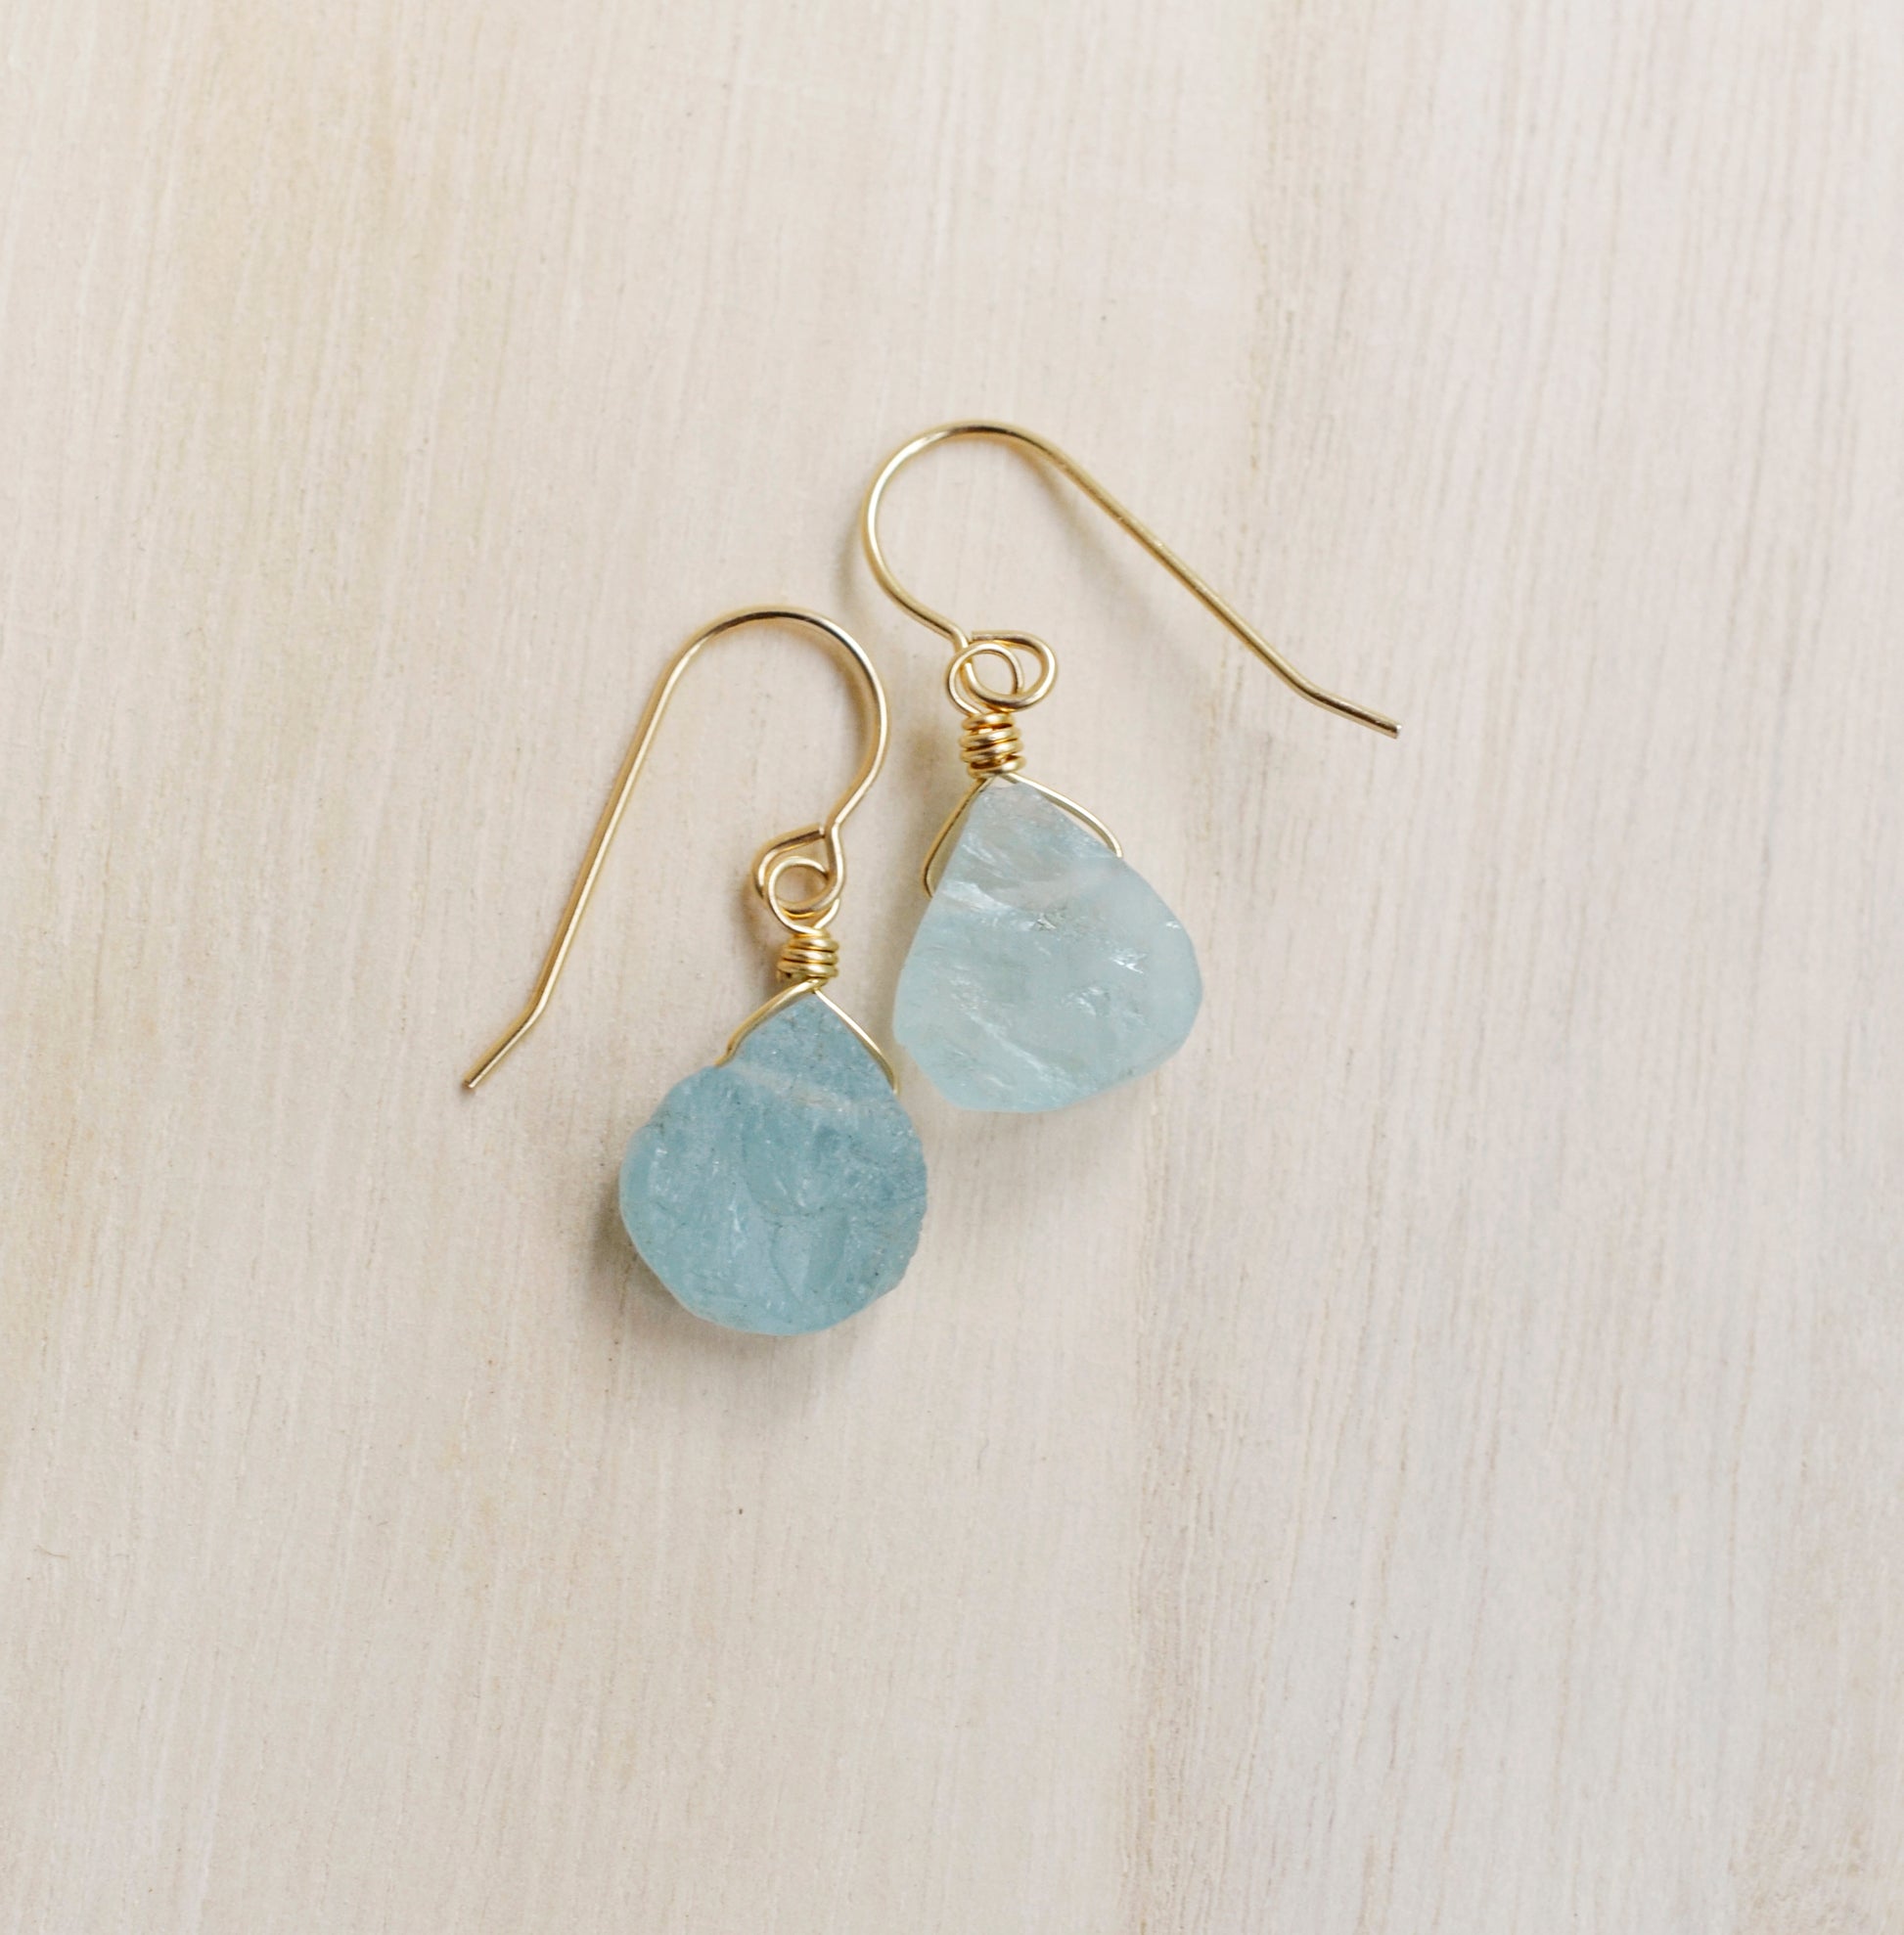 Aquamarine Earrings, Natural Raw Aquamarine Crystal Dangles, Sterling Silver or 14k Gold Filled, March Birthstone Jewelry, Something Blue Wedding